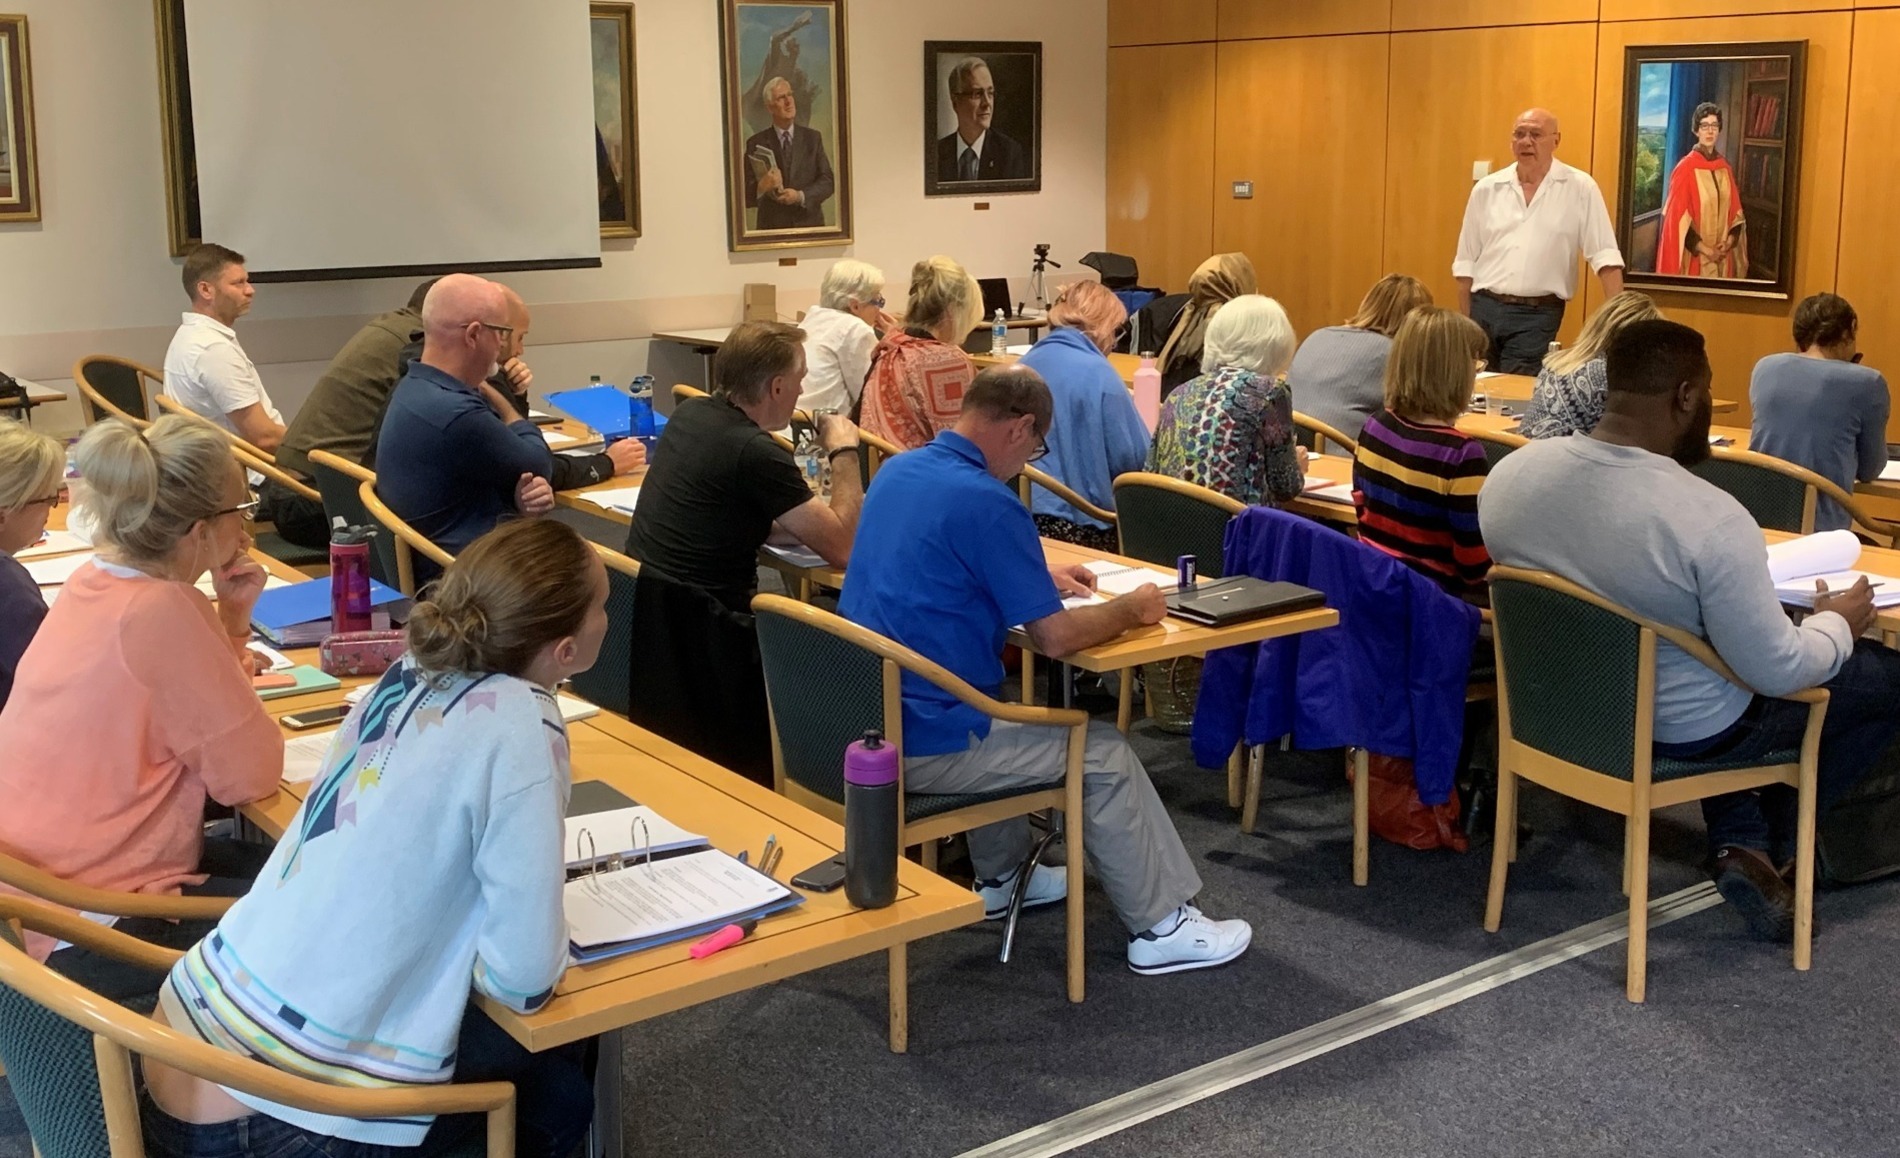 hypnotherapy training at the university of surrey